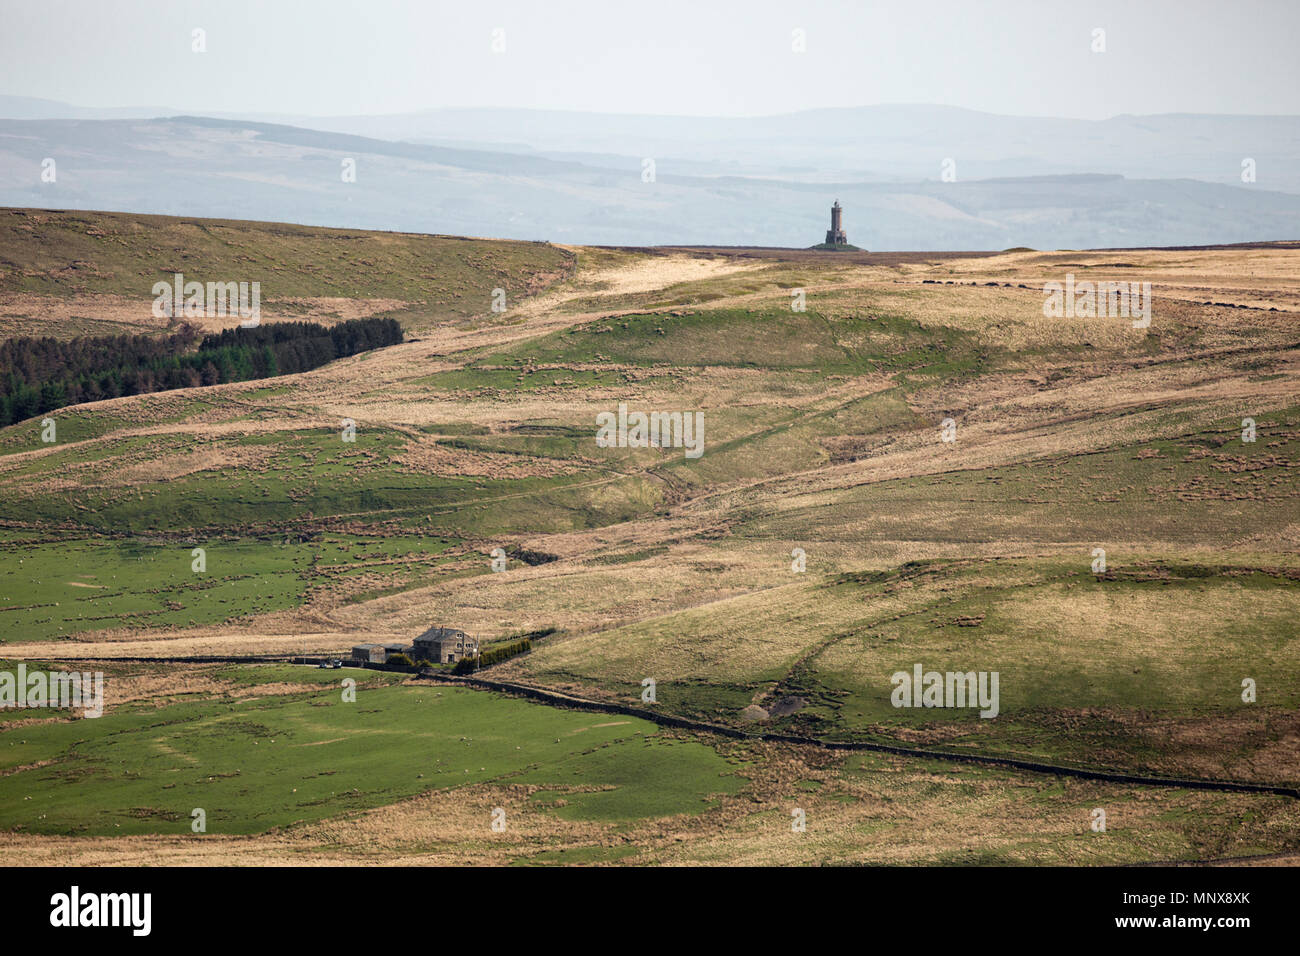 Darwen Tower (Jubilee Tower) and a view of the West Pennine Moors showing the emptiness and bleak beauty of the area. Stock Photo